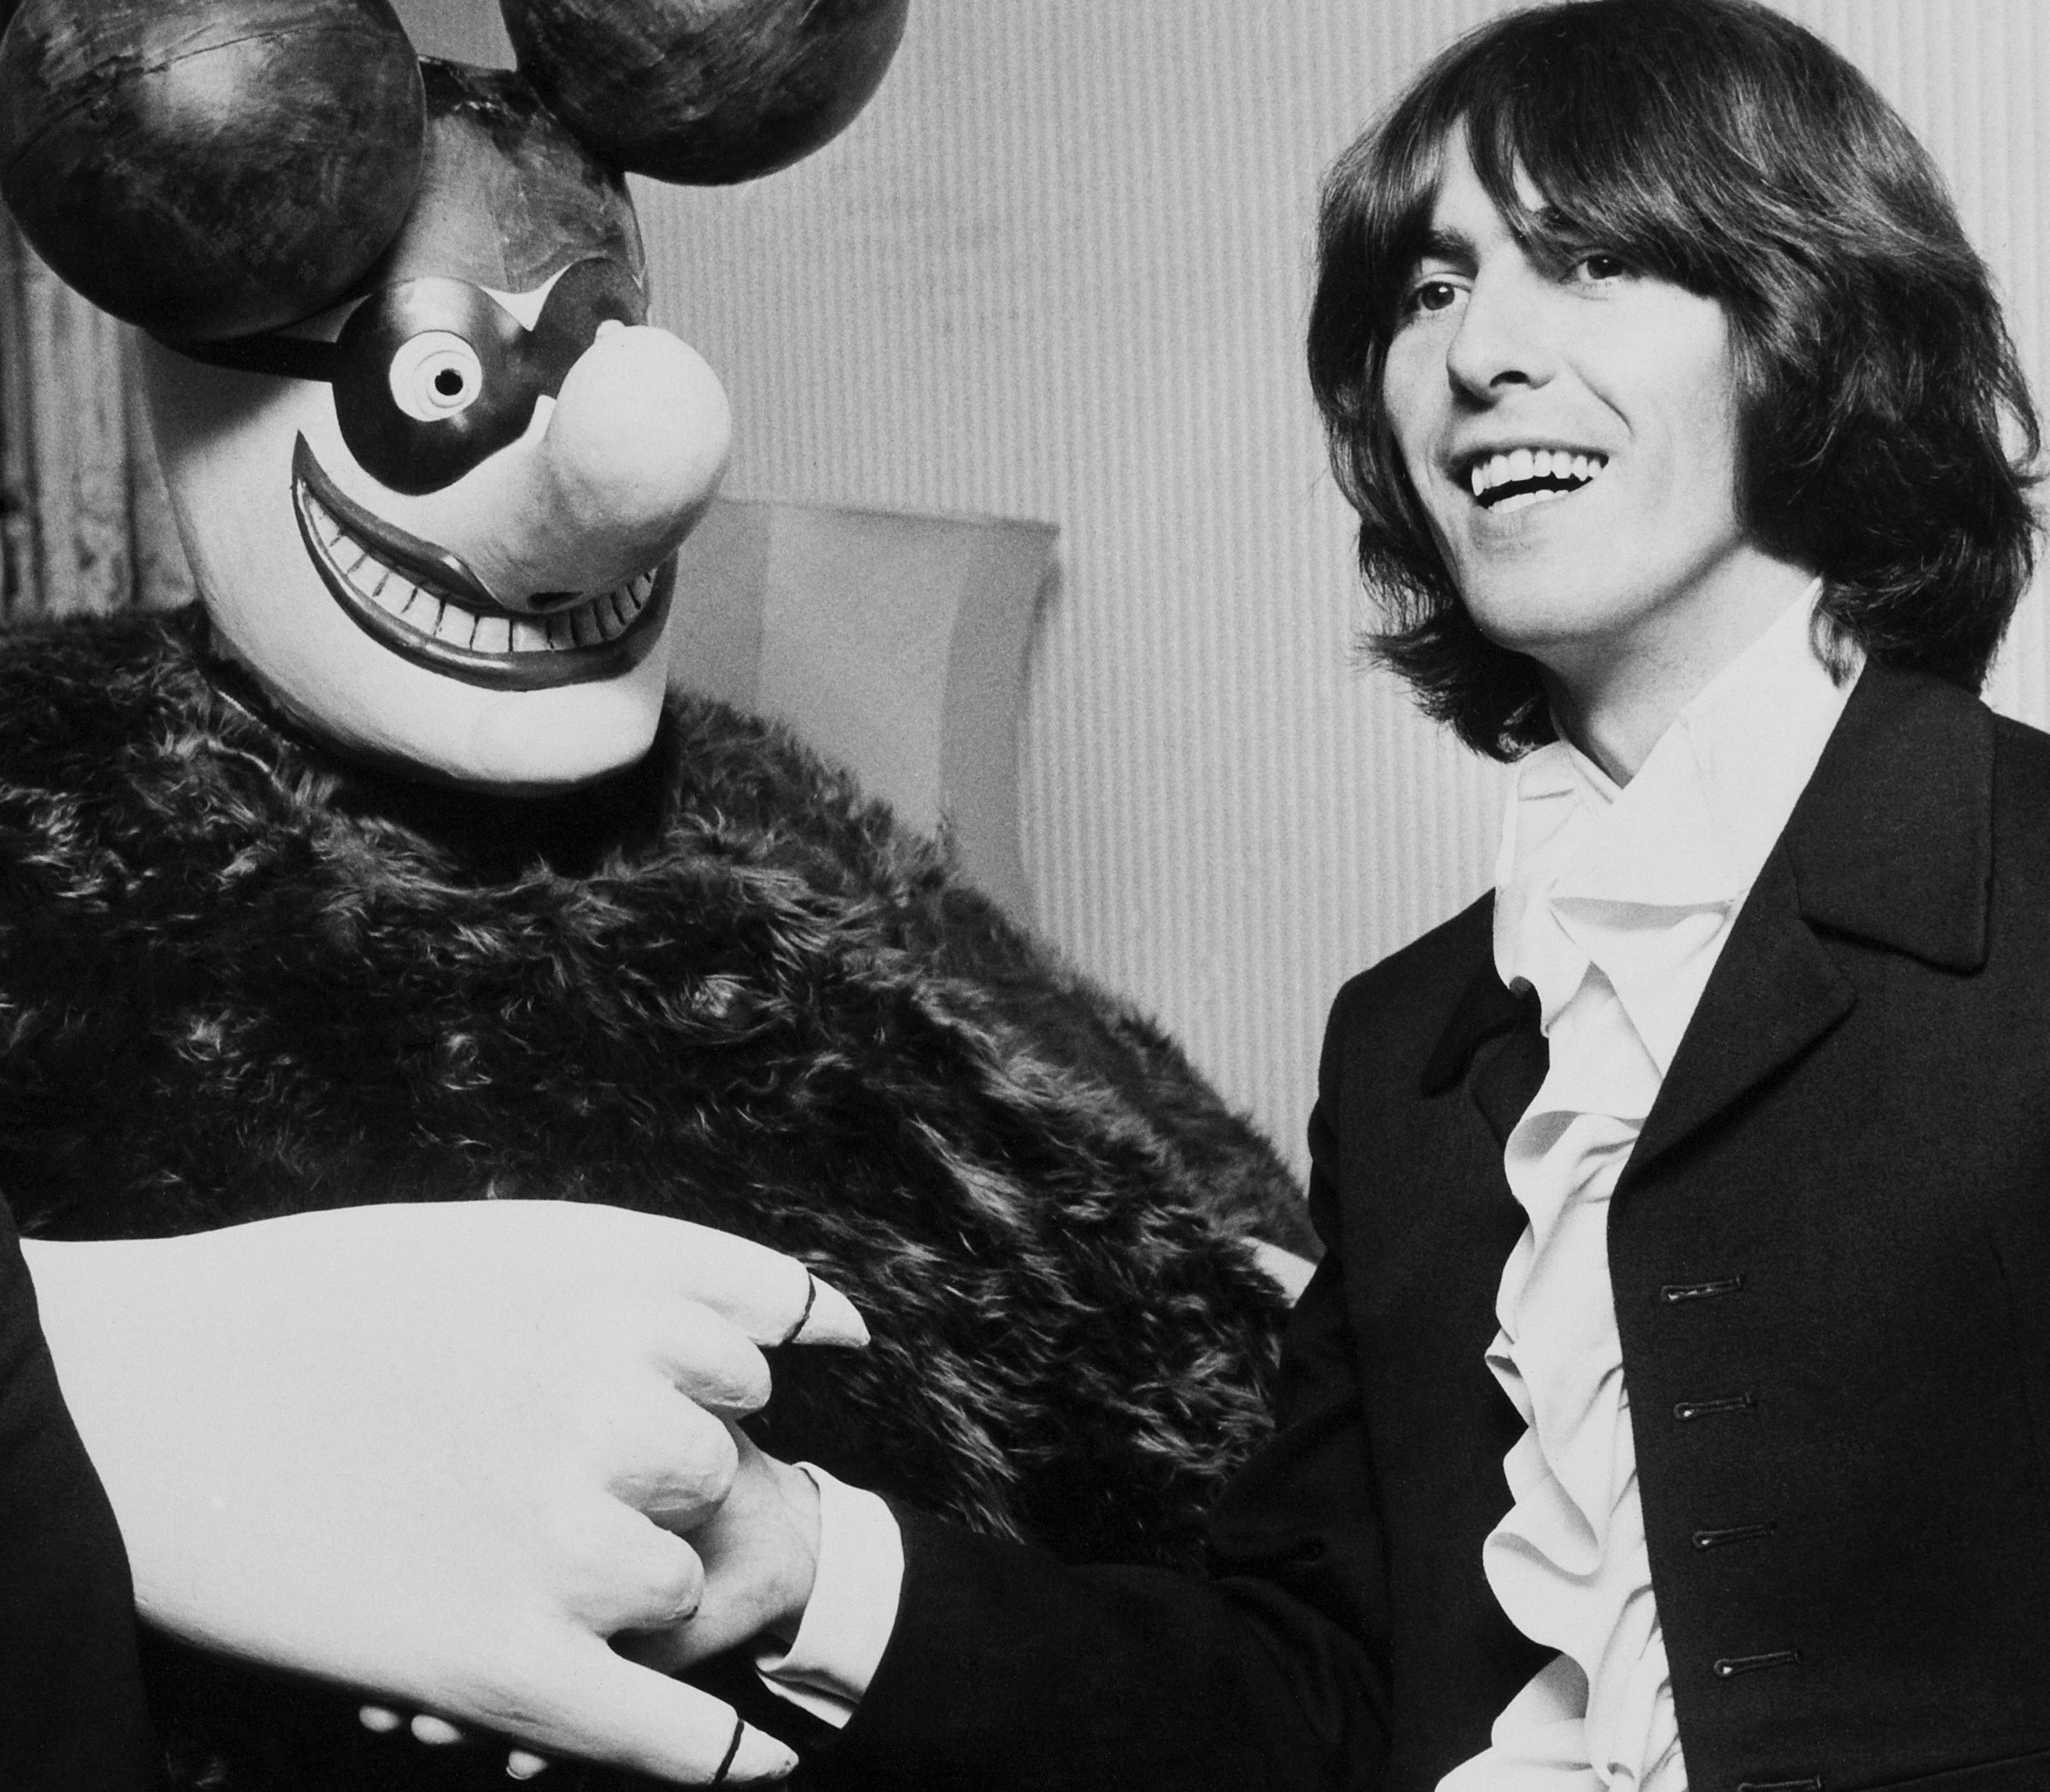 The Beatles' George Harrison wearing a suit and standing near someone dressed as a Blue Meanie from 'Yellow Submarine'